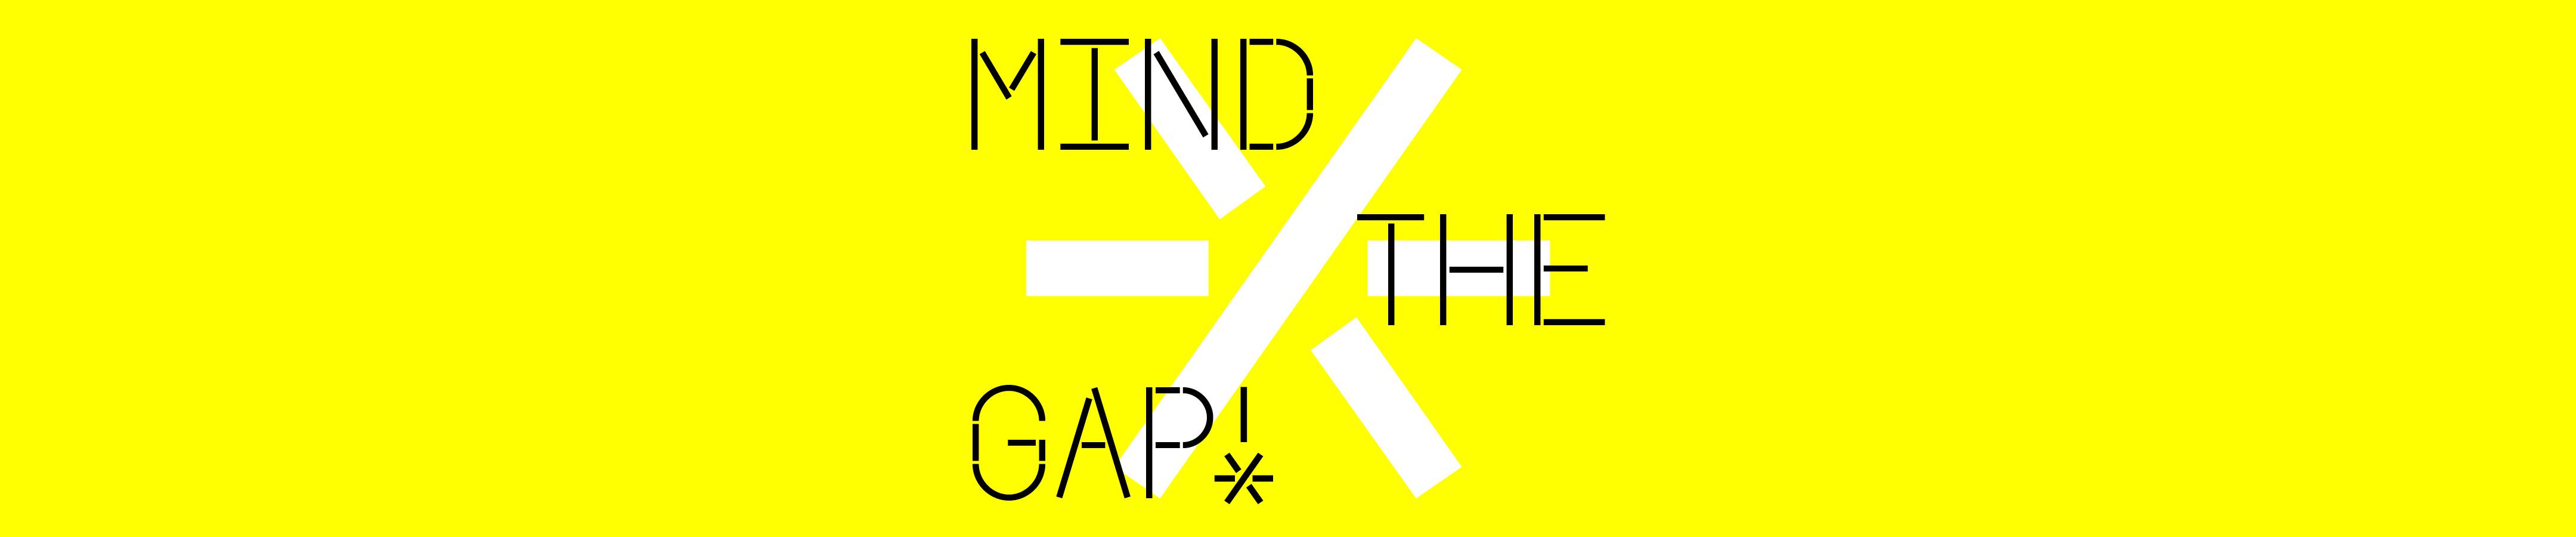 Against a neon yellow background is an illustration of a white star. Above it in black capital letters is written "MIND THE GAP!".